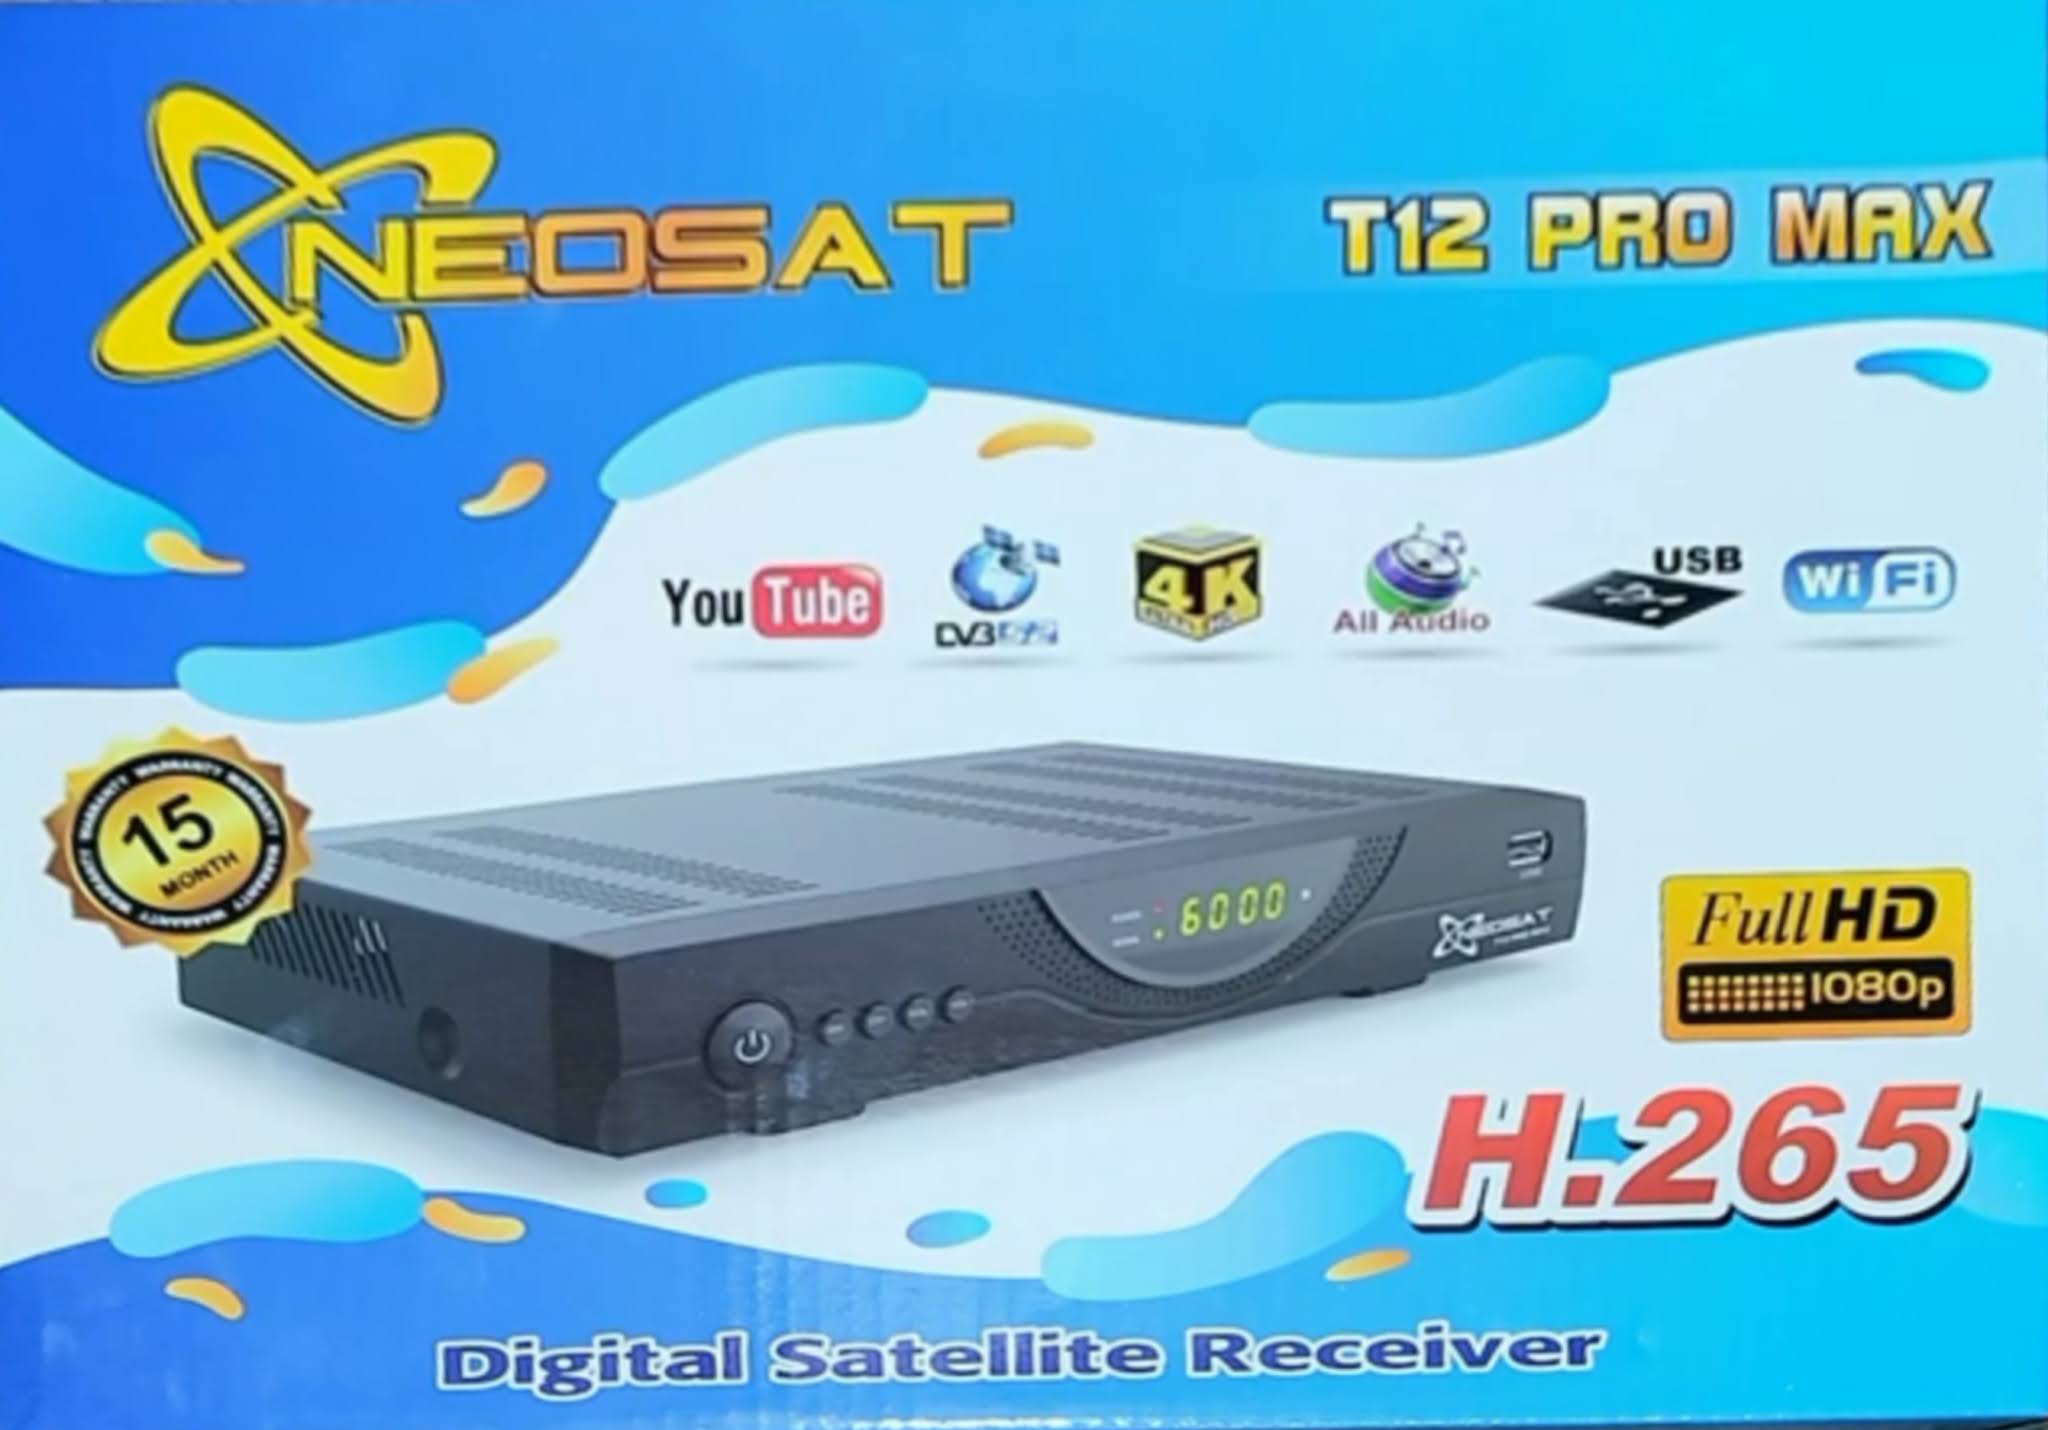 NEOSAT T12 PRO MAX NEW SOFTWARE SPECIFICATIONS AND REVIEW